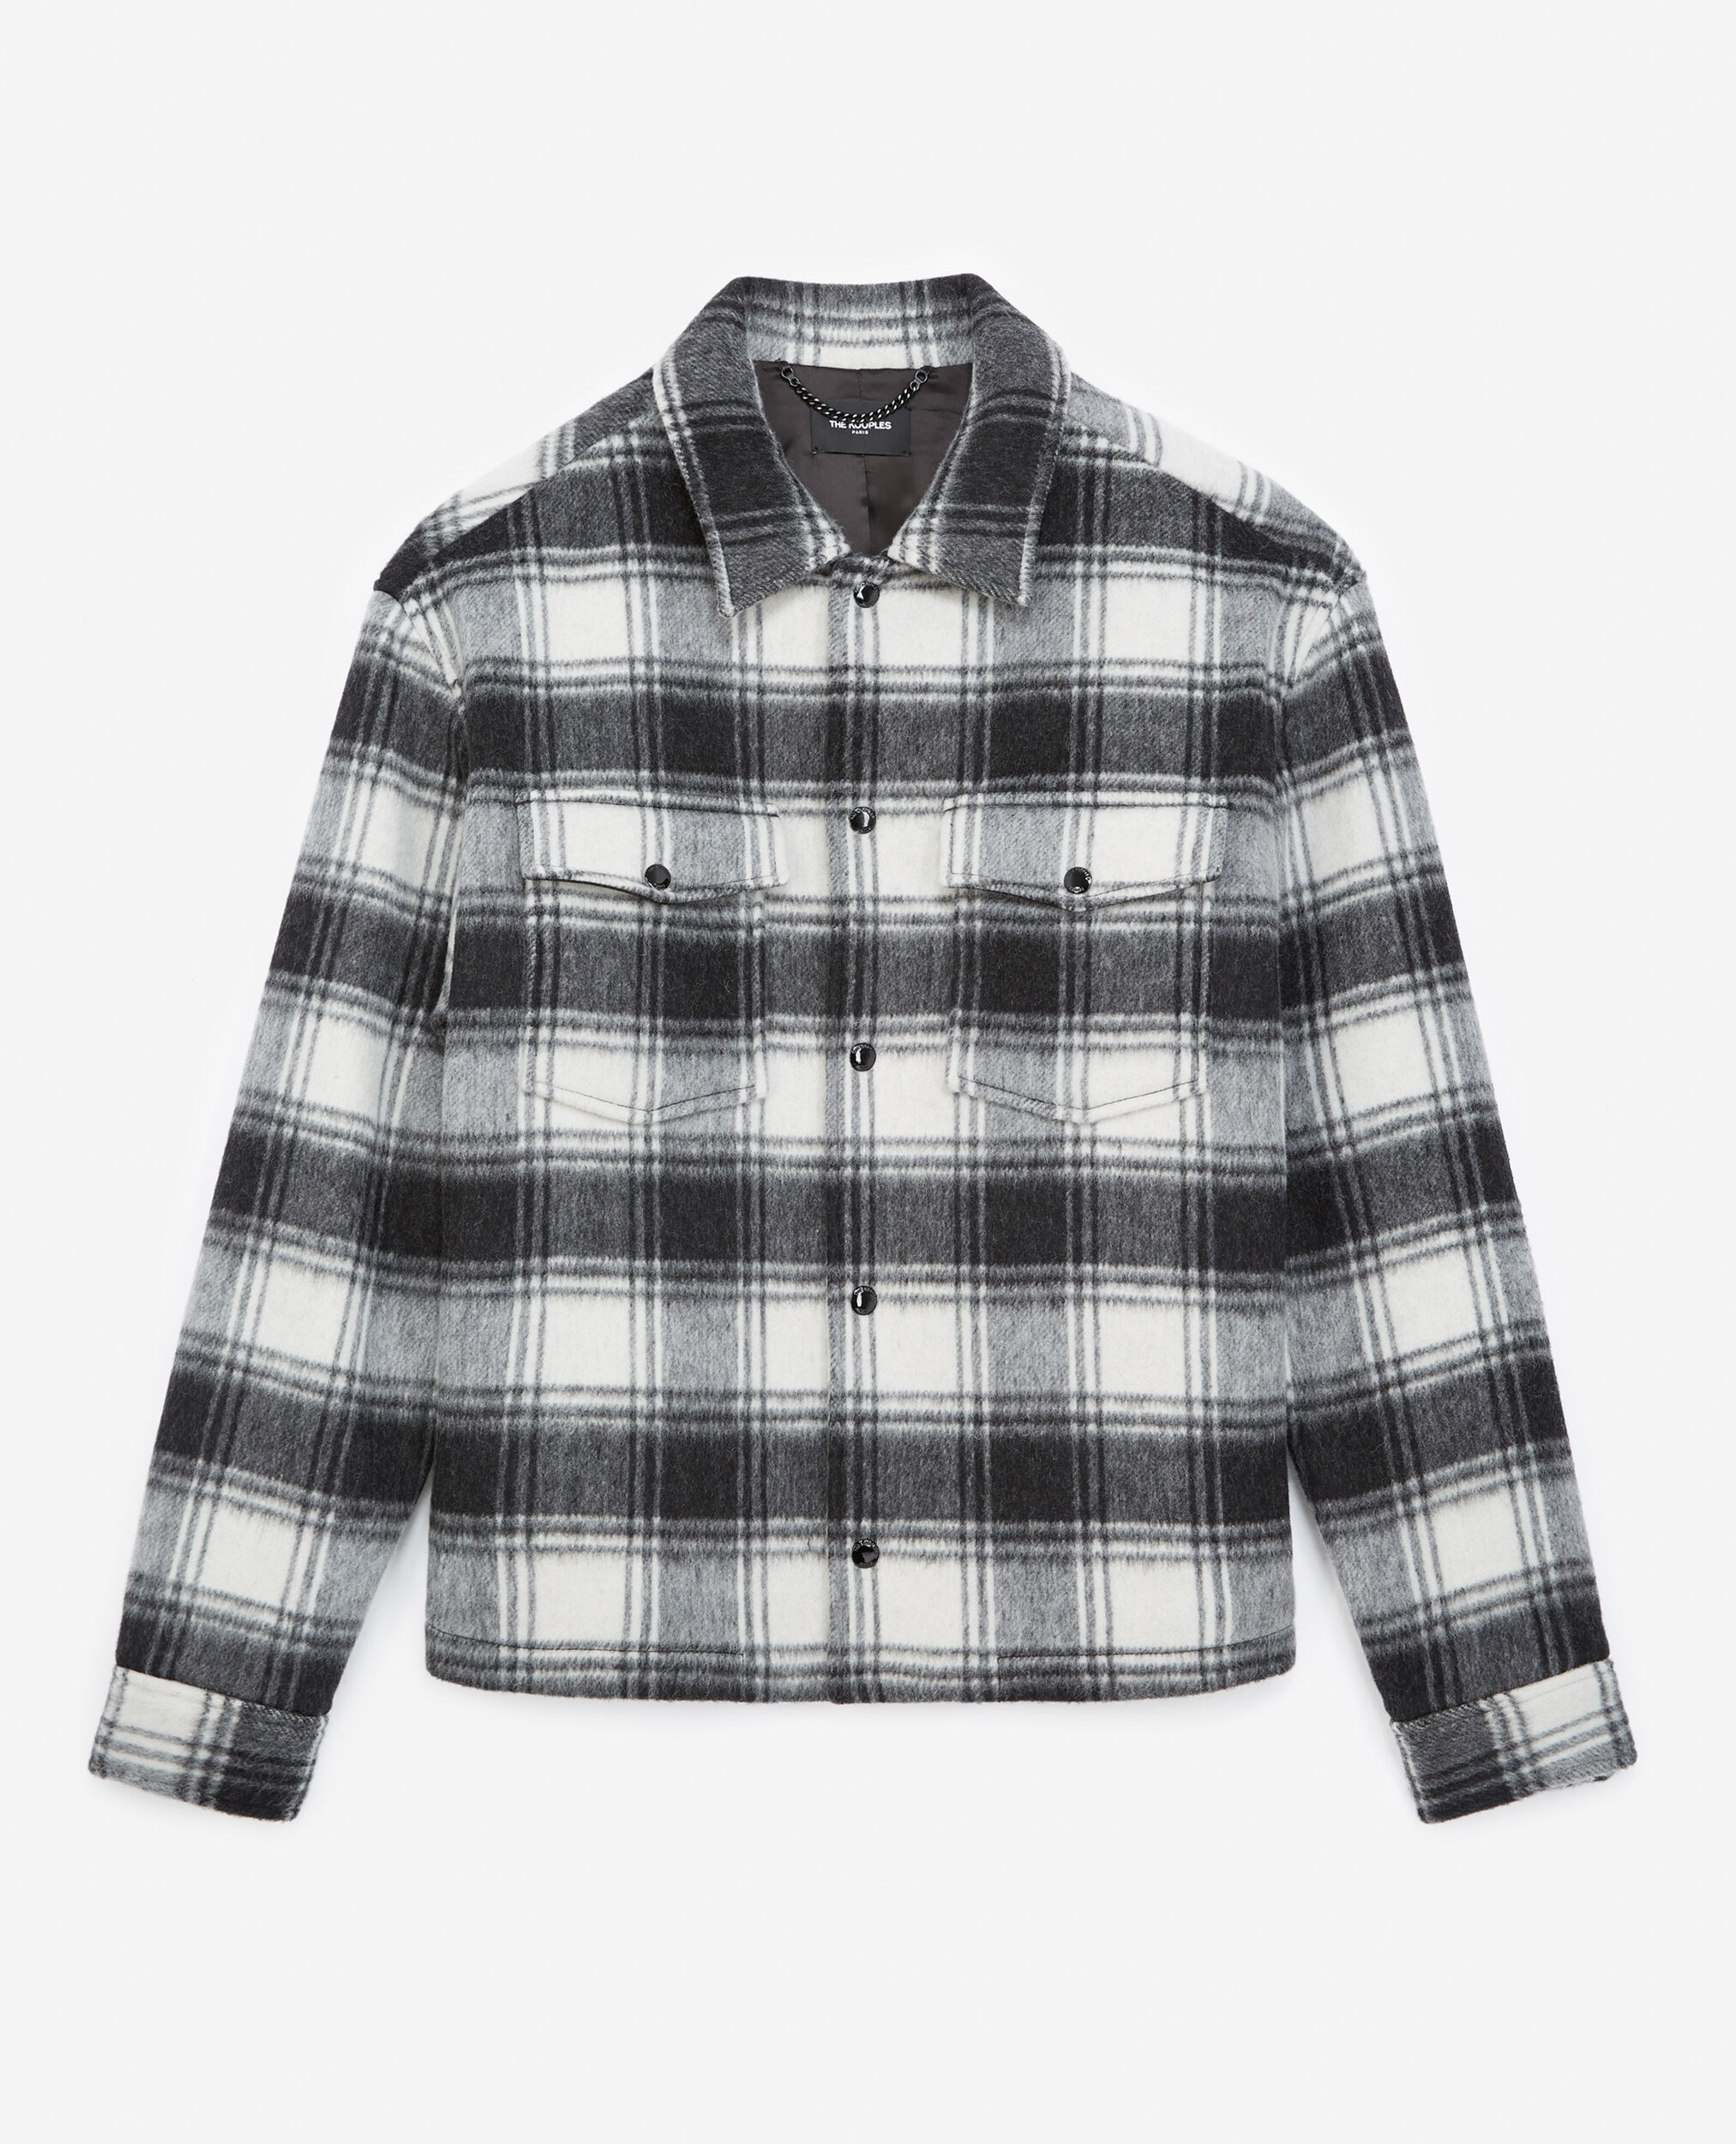 Black and white wool jacket with check motif